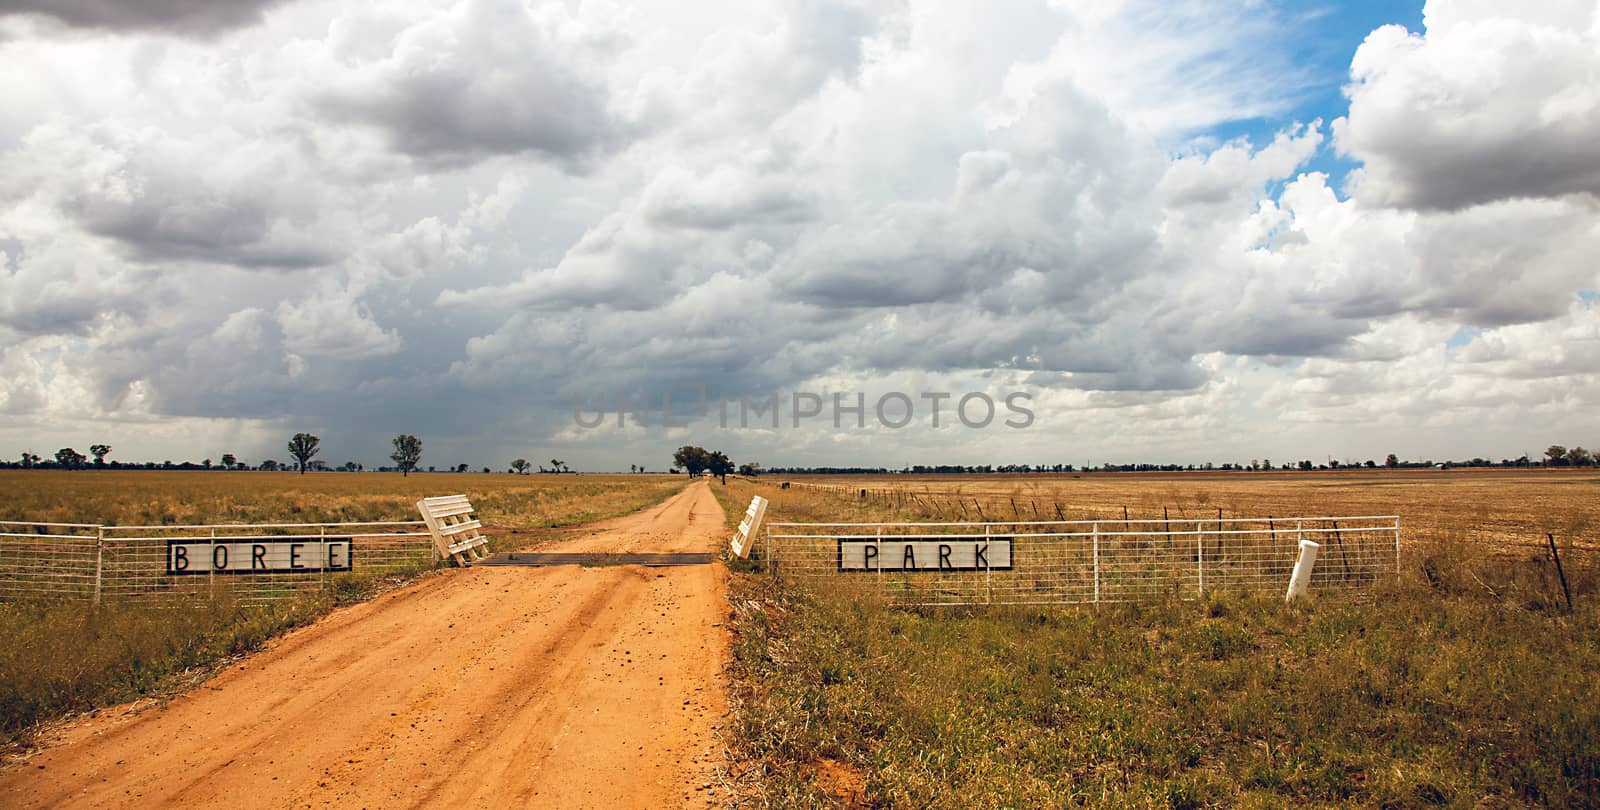 Boree Park Outback at Dubbo New South Wales Australia by Makeral